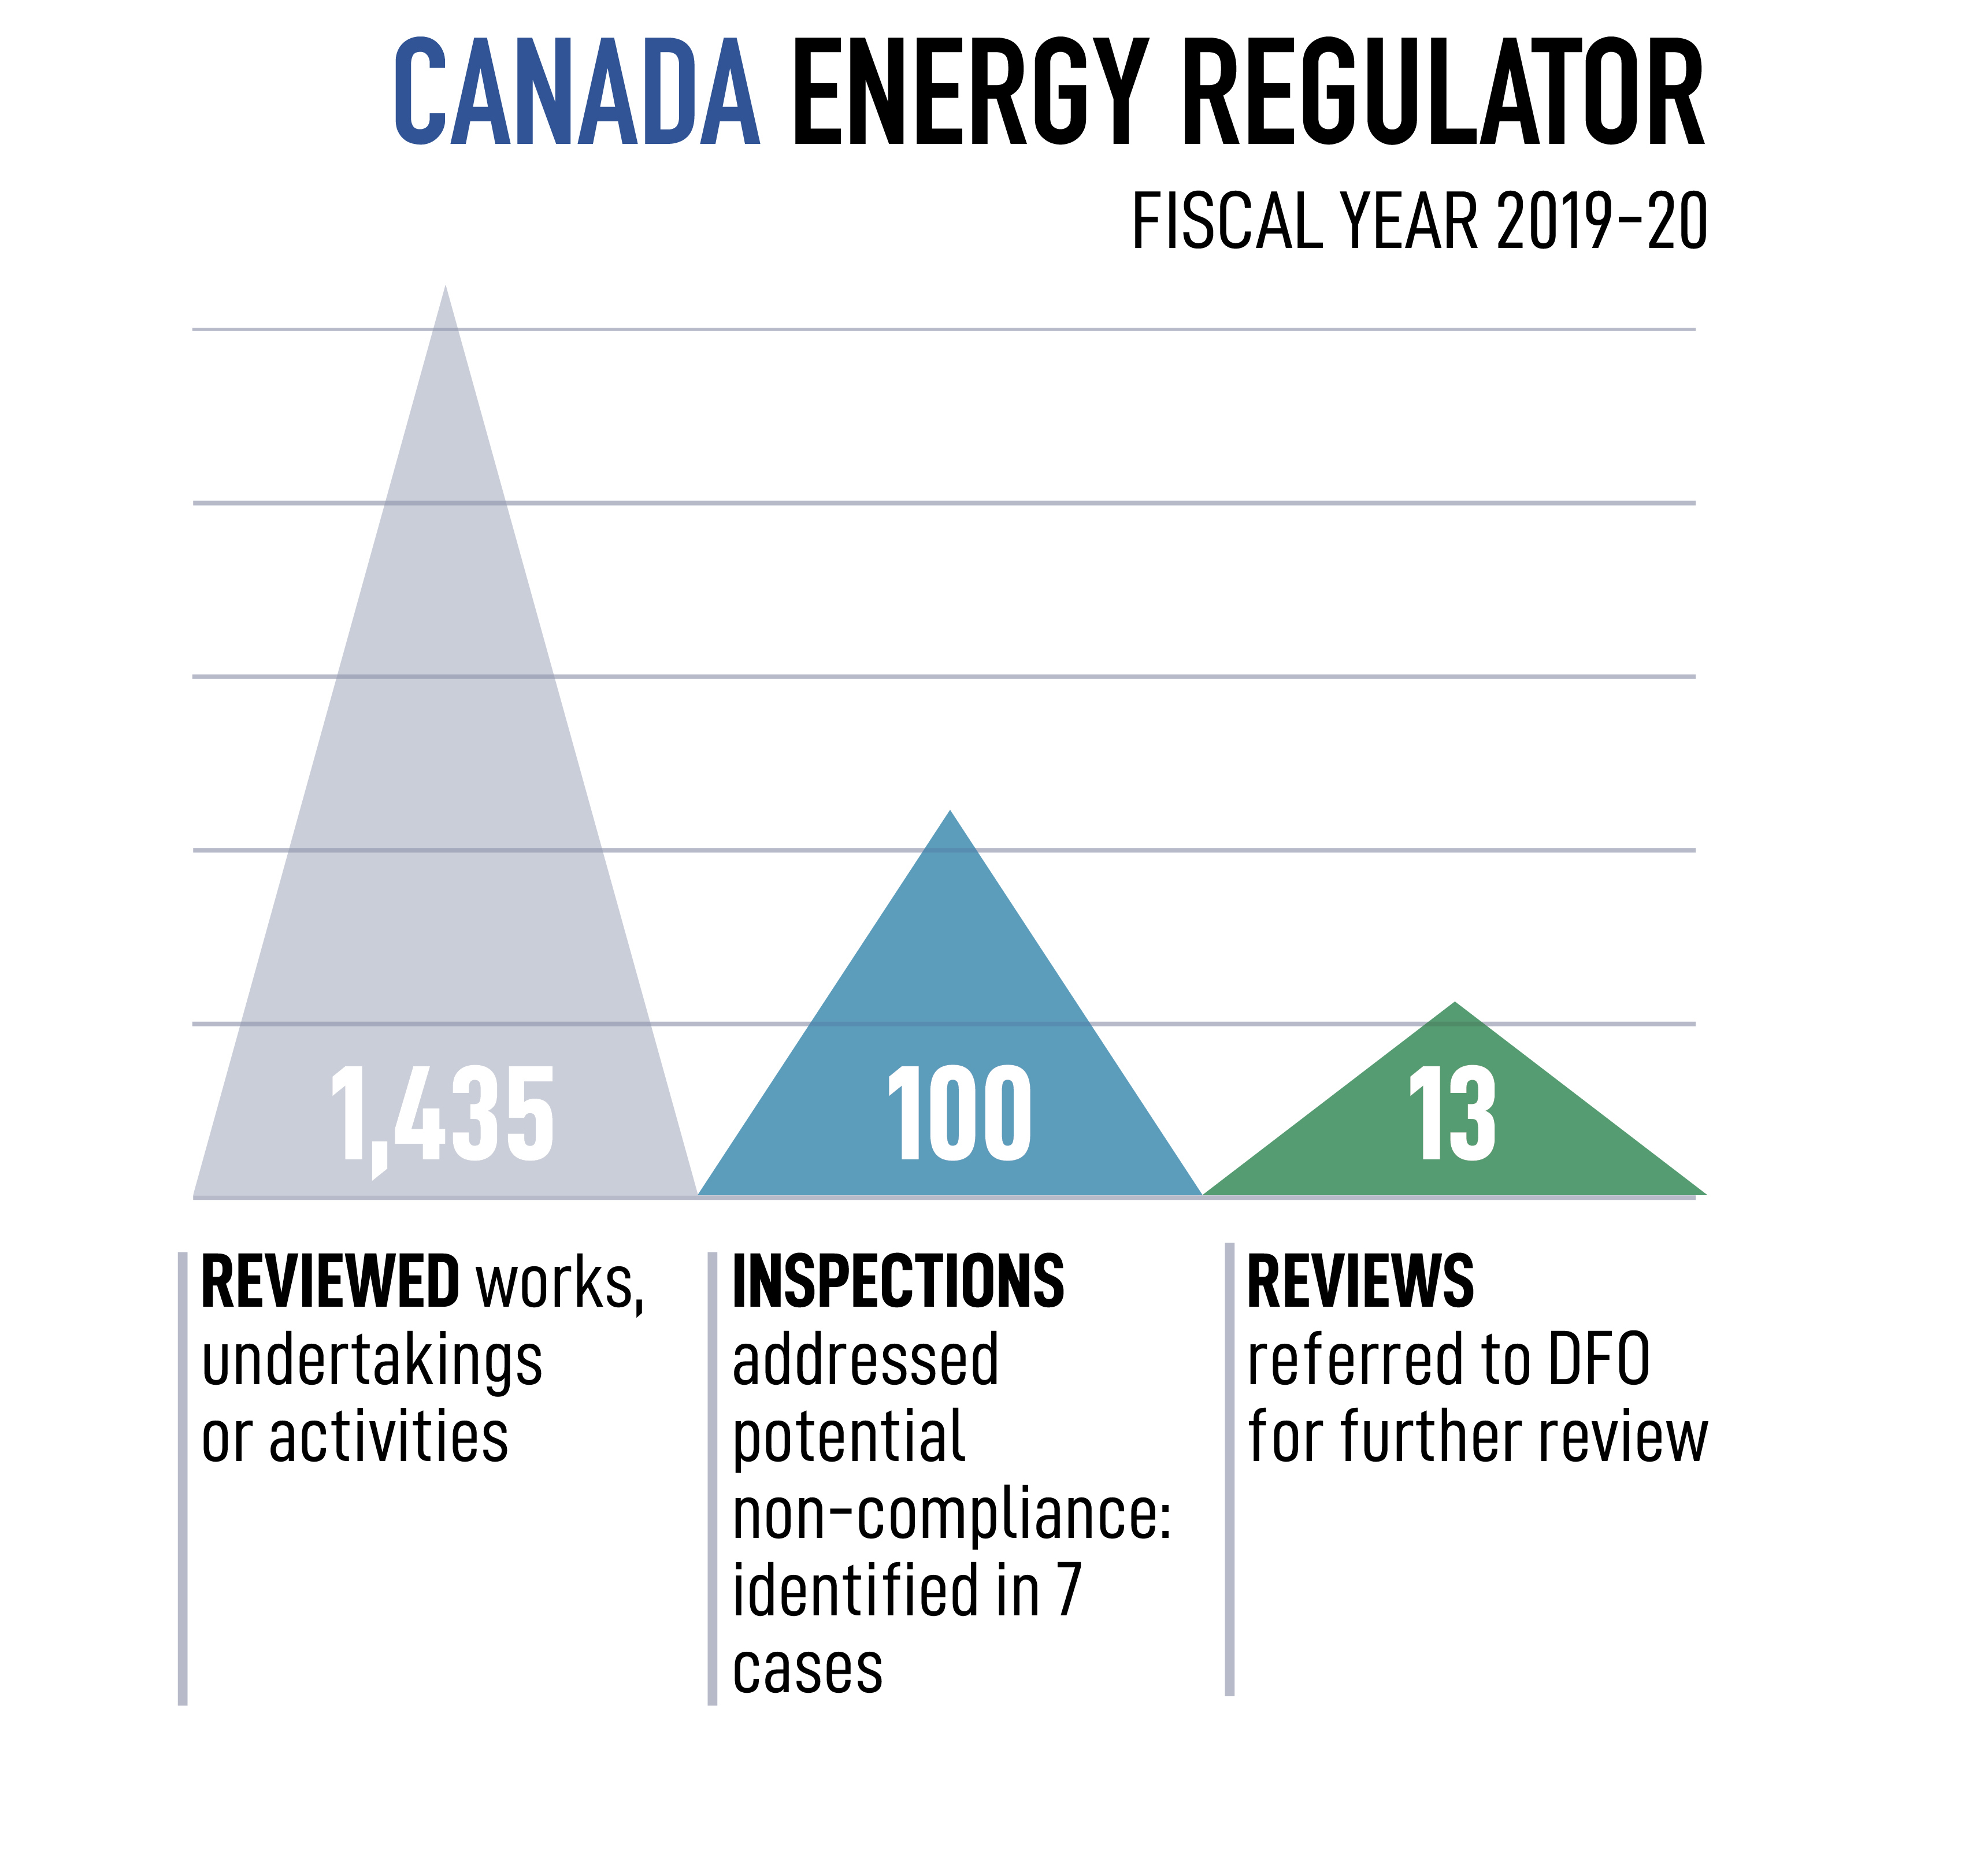 Infographic showing Canada Energy Regulator activities in fiscal year 2019-20, as described in section 2.5.